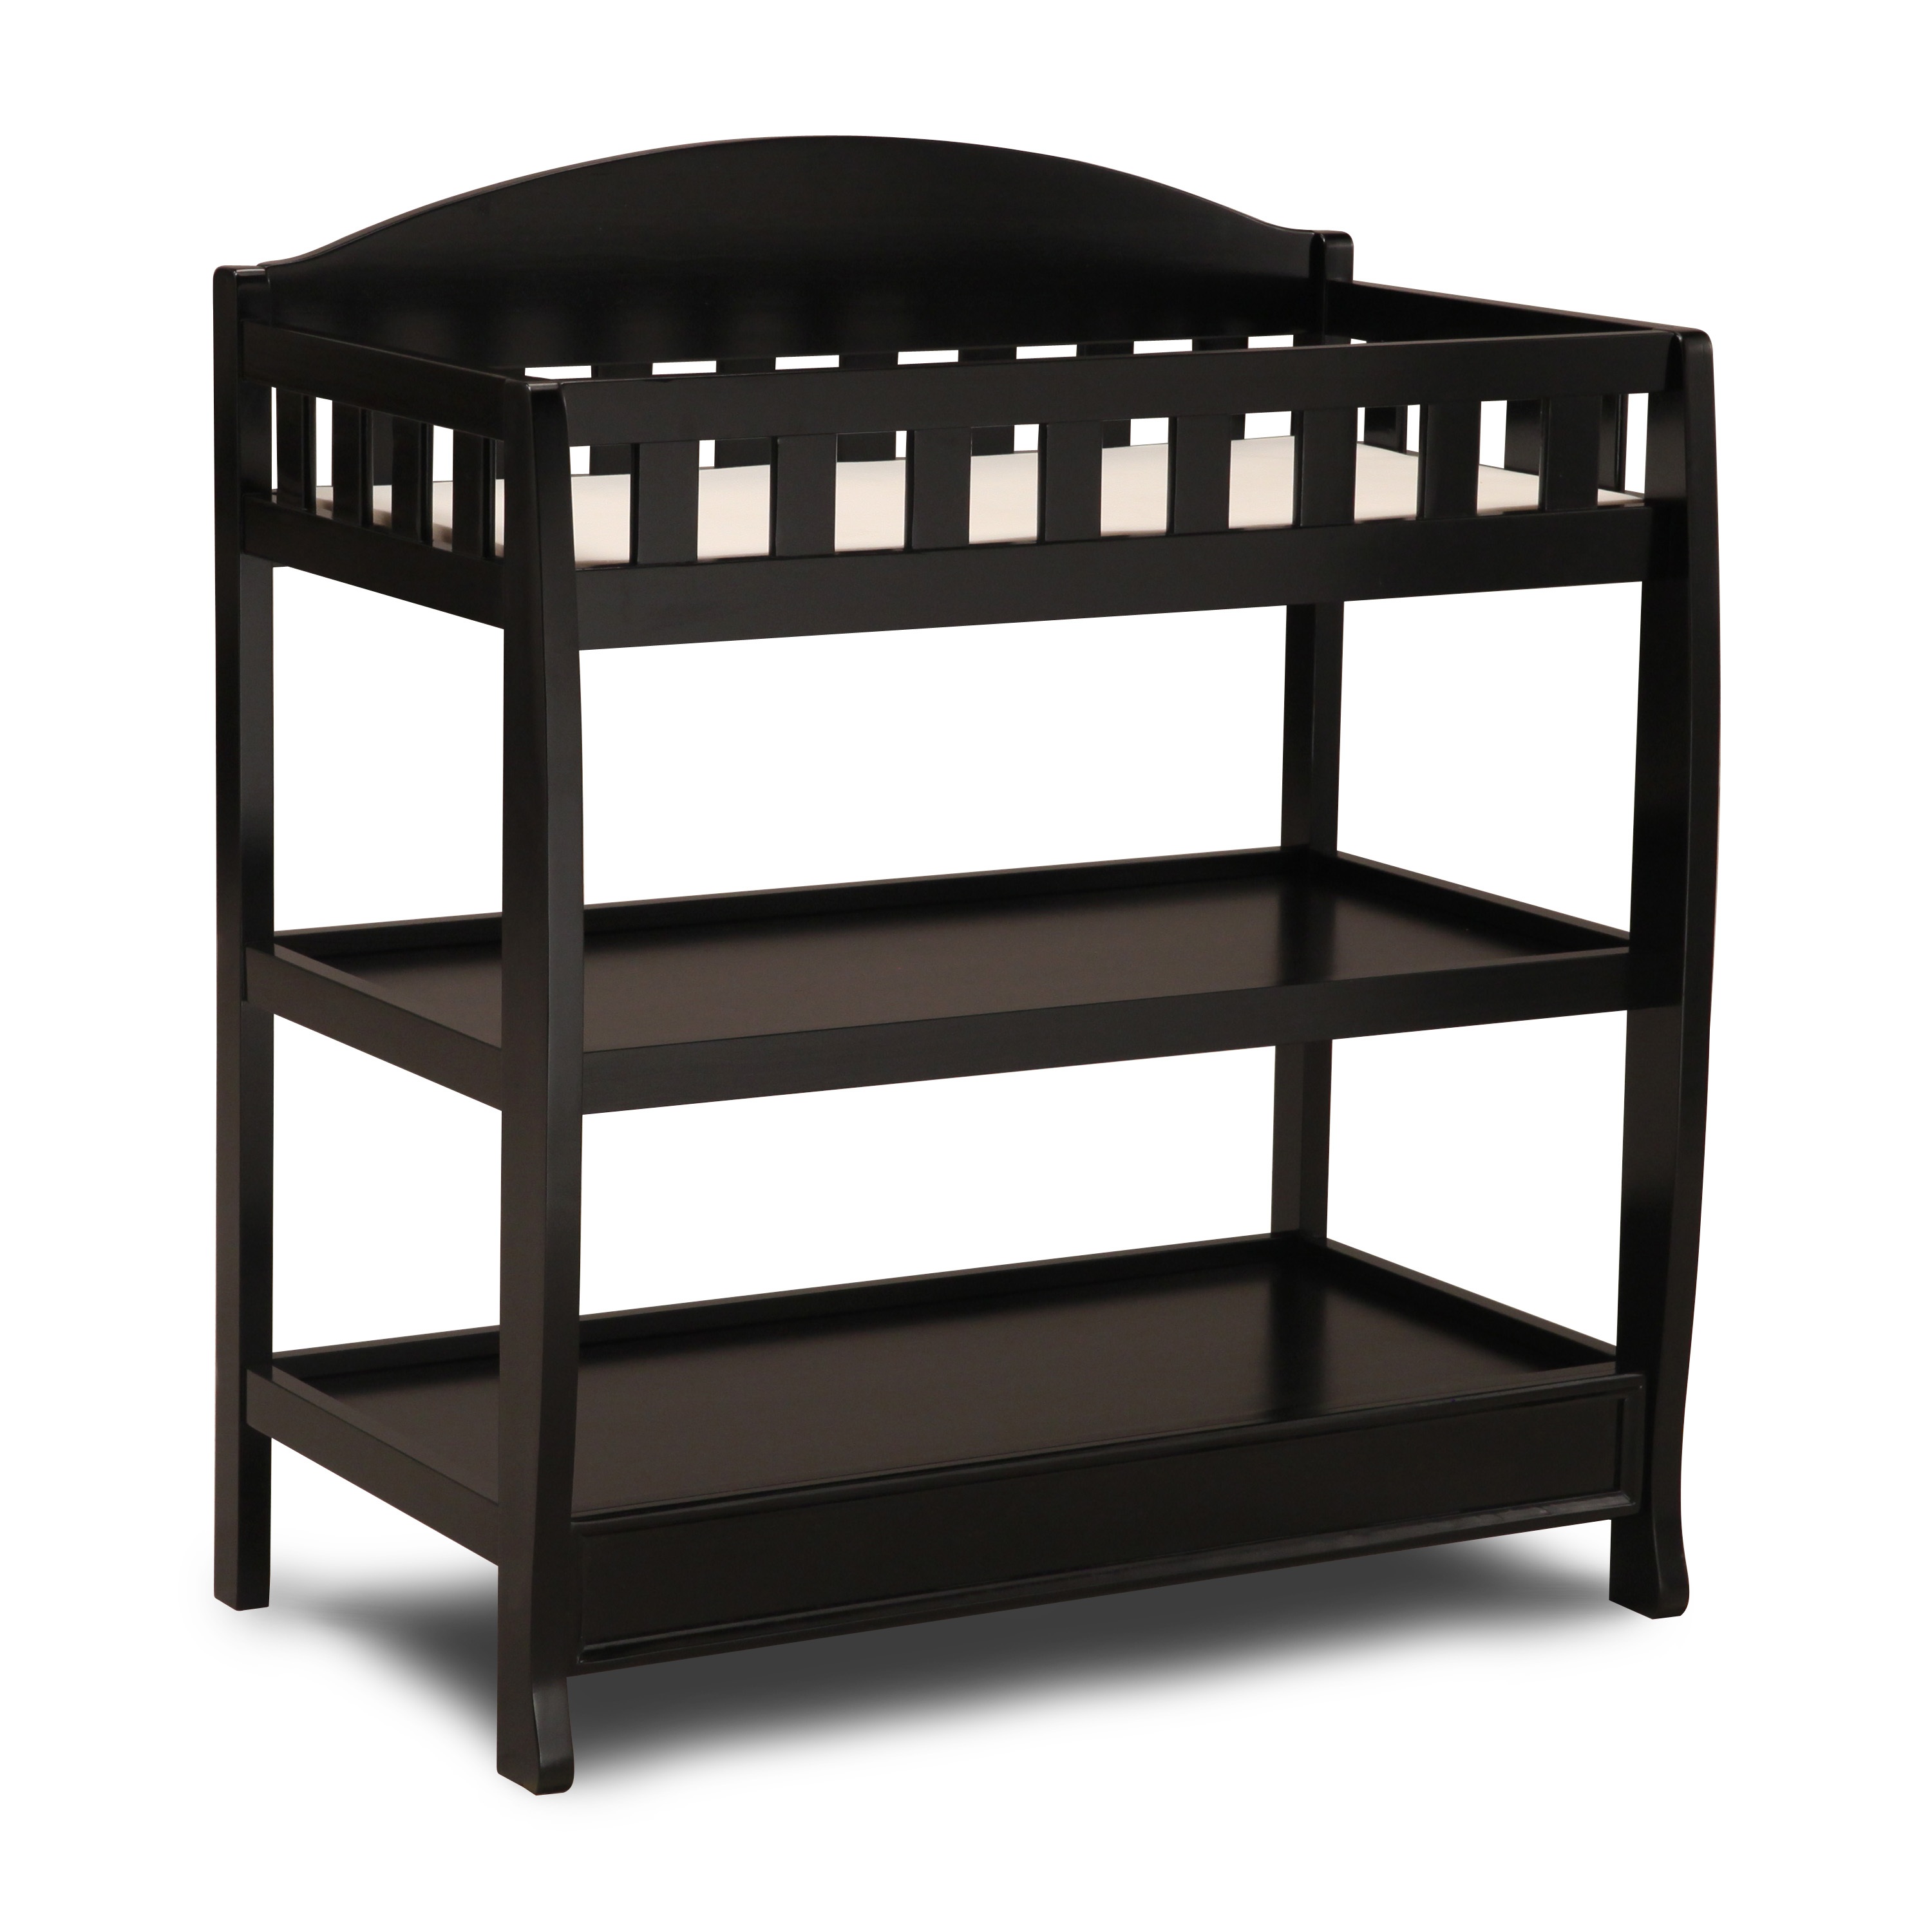 Delta Children Wilmington Changing Table with Pad, Black - image 1 of 6